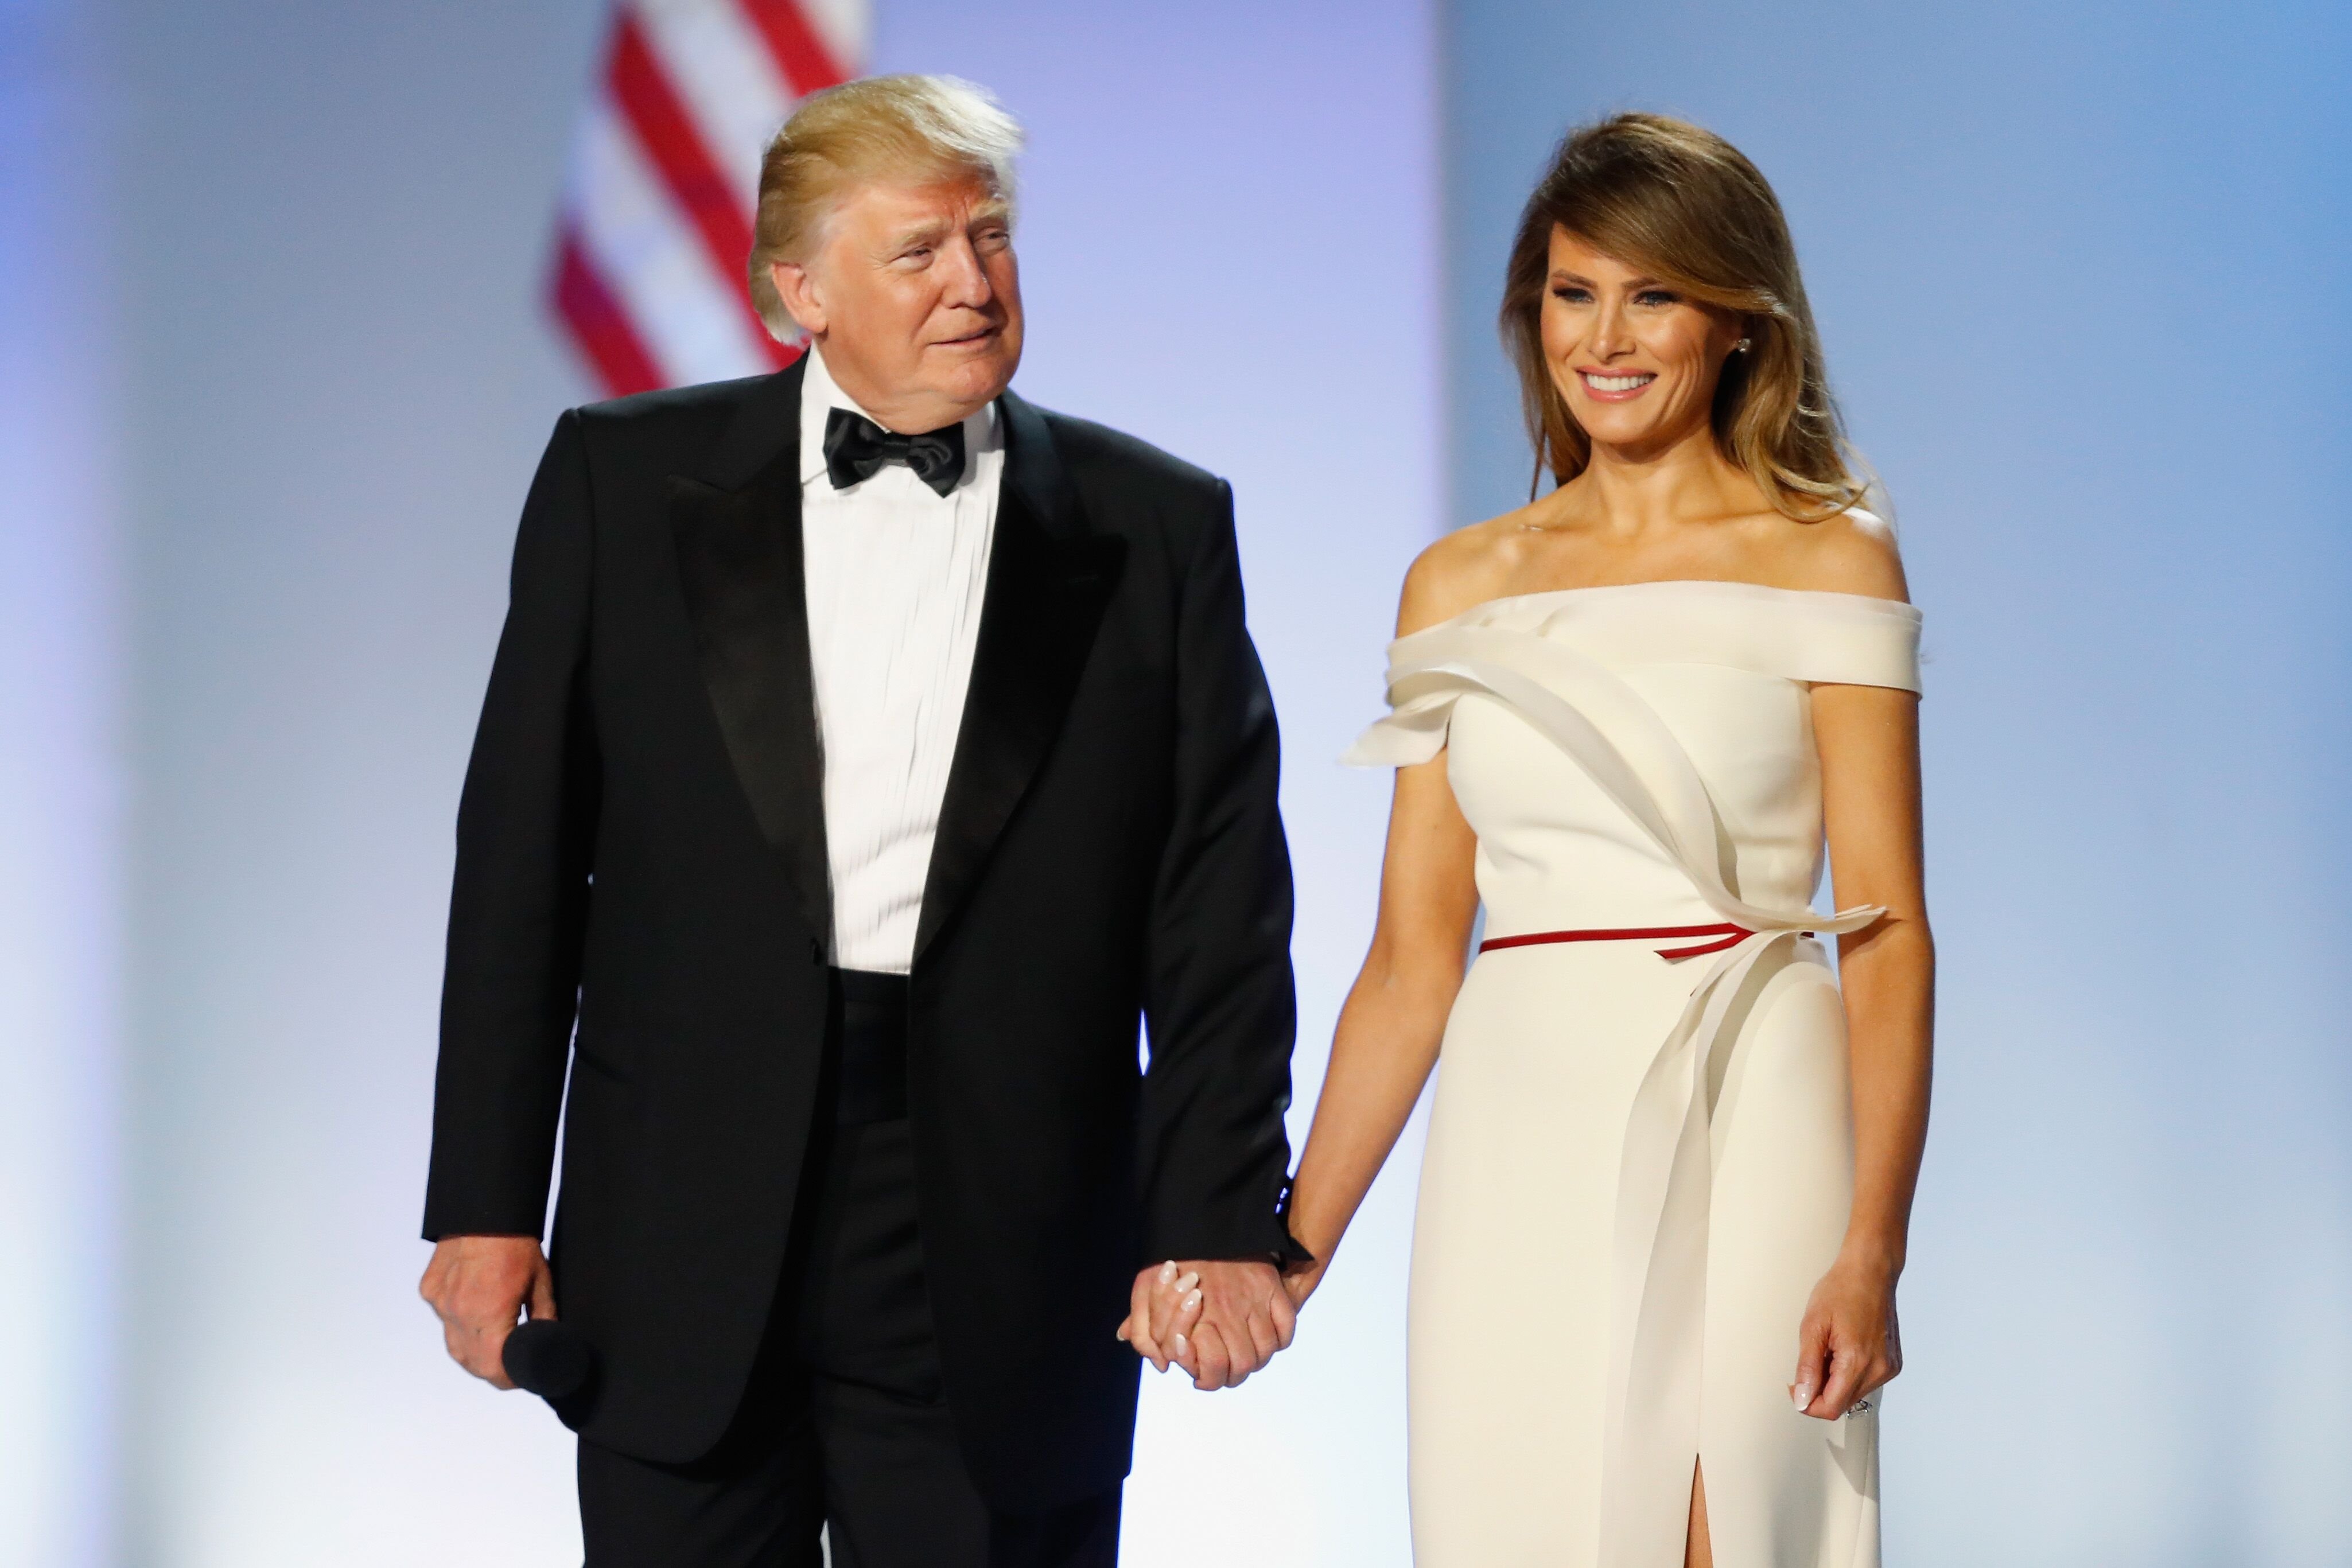 President Donald Trump and First Lady Melania Trump at the Freedom Ball on January 20, 2017 in Washington, D.C. | Source: Getty Images 